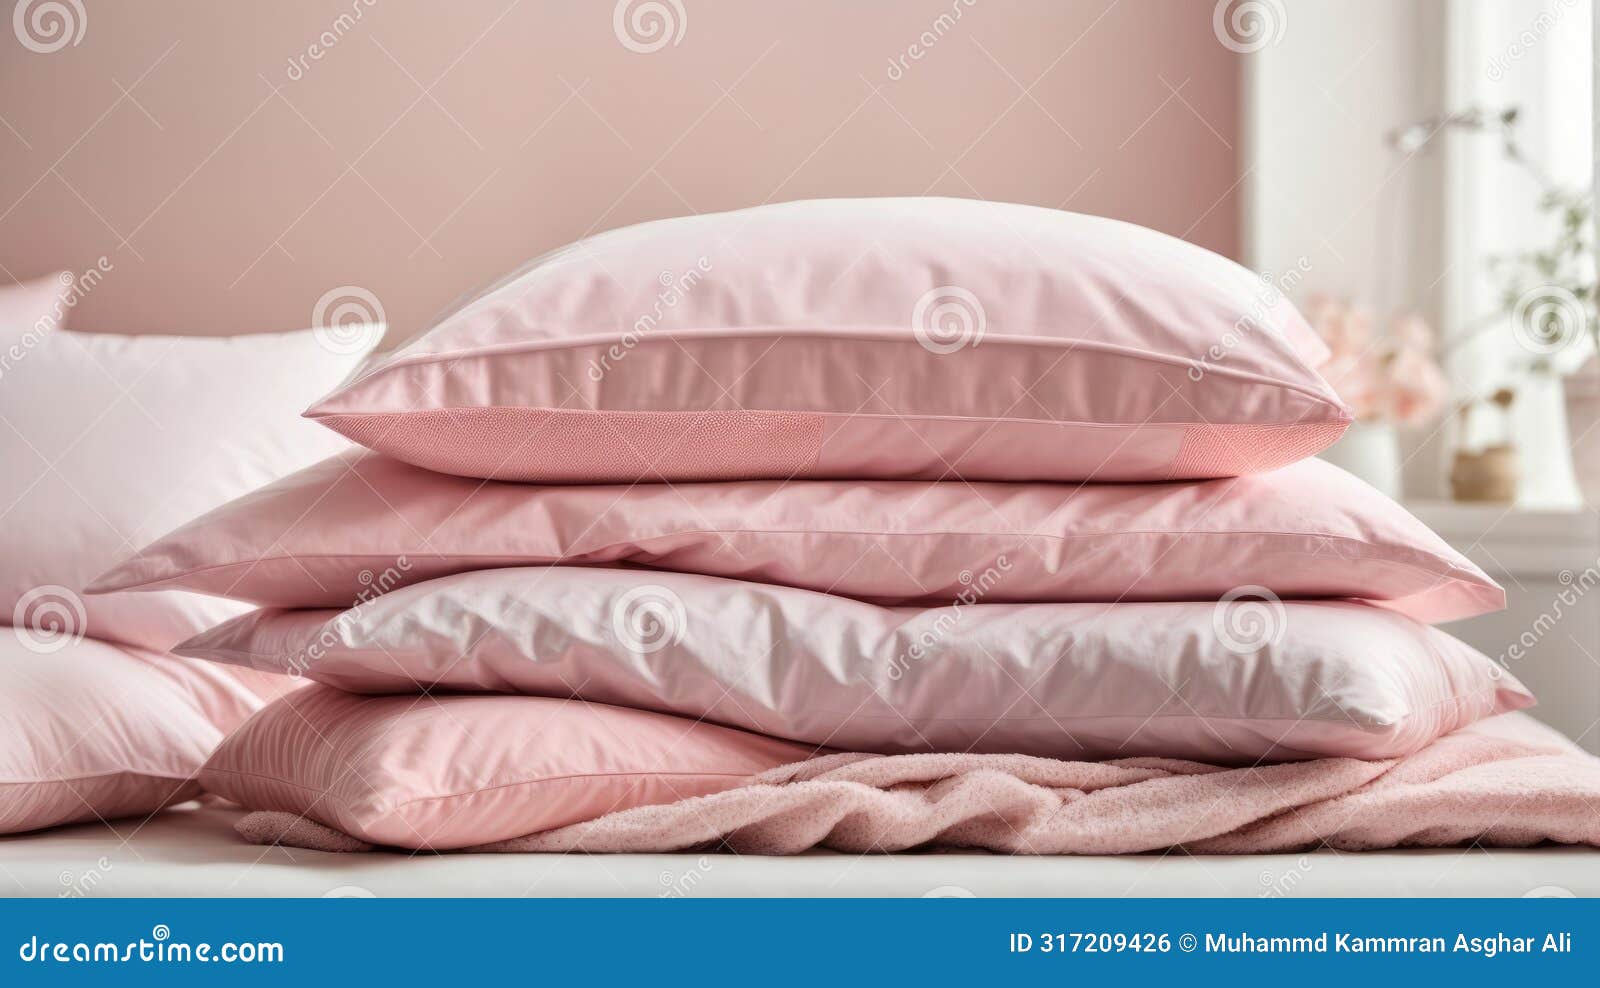 ?lose-up of a pile of bed linen pillows blankets pink pastel colors on white